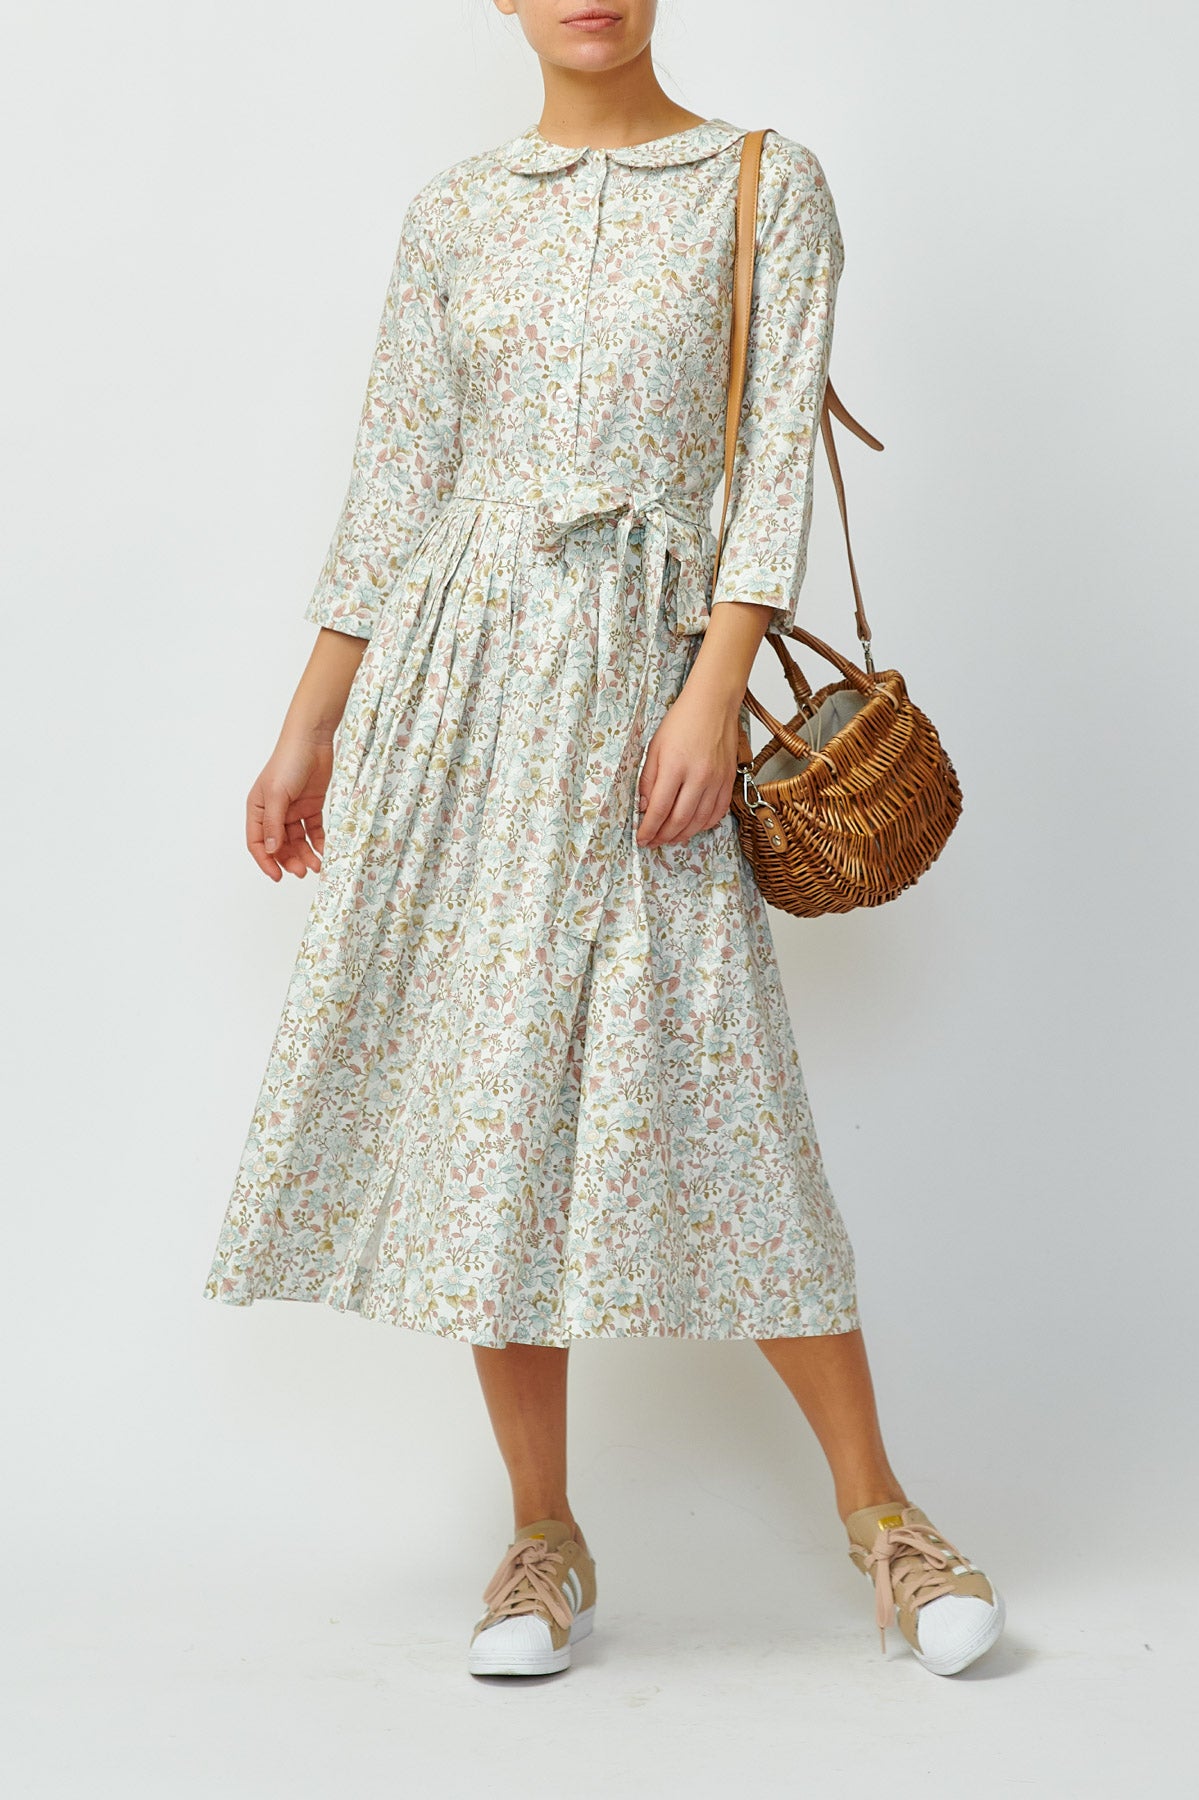 Shirt dress with pastel flowers on white